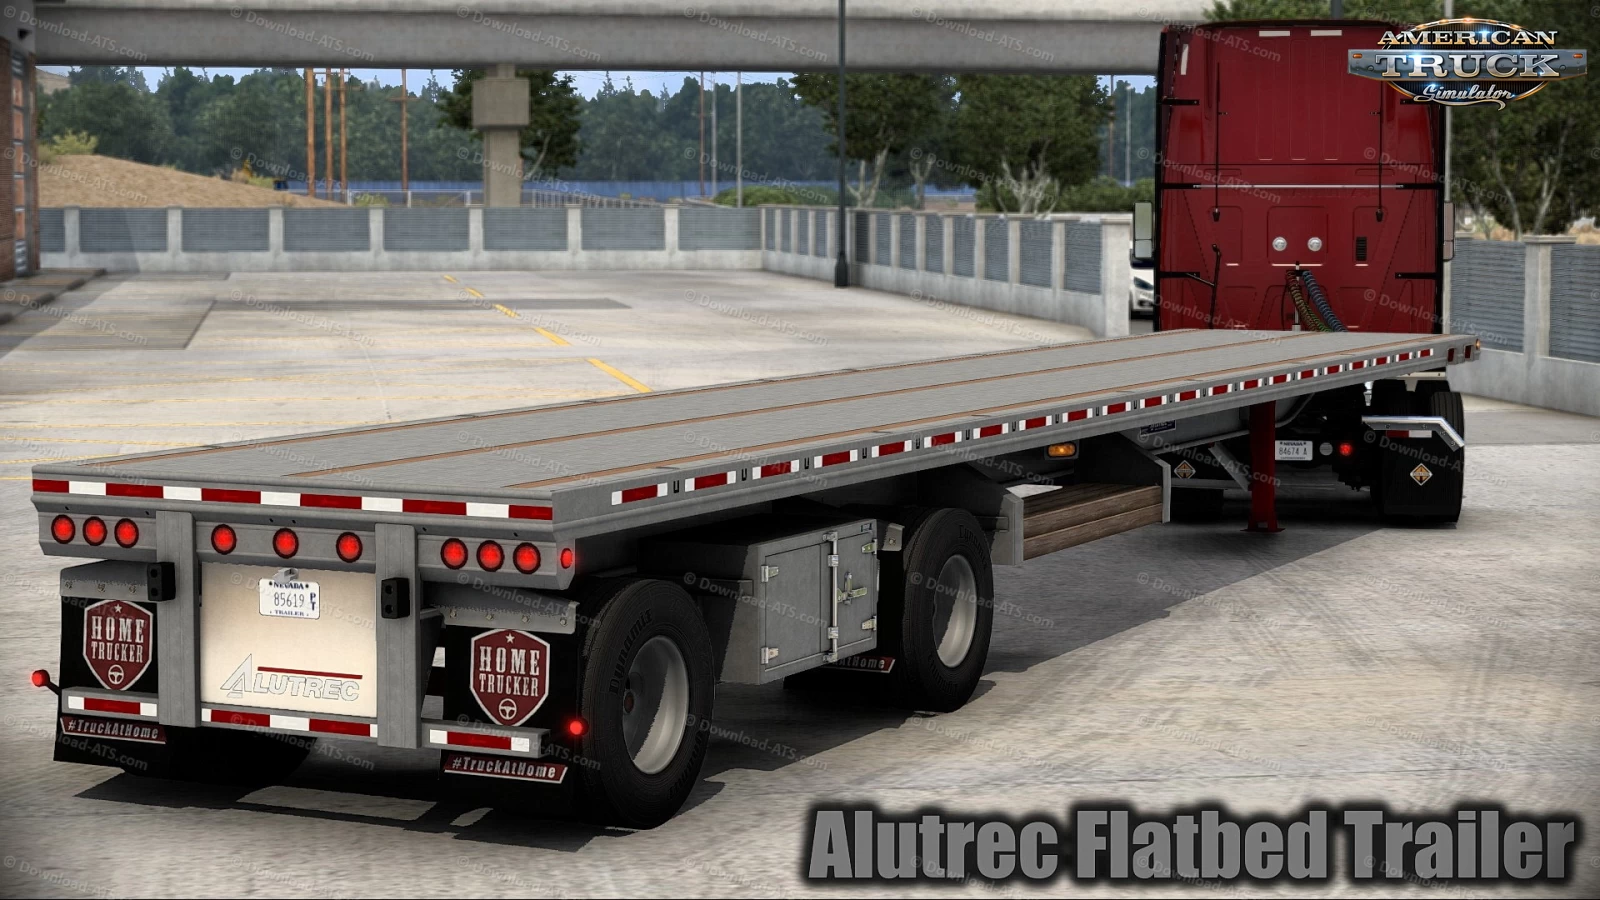 Alutrec Flatbed Trailer v1.1.5 by Smarty (1.44.x) for ATS